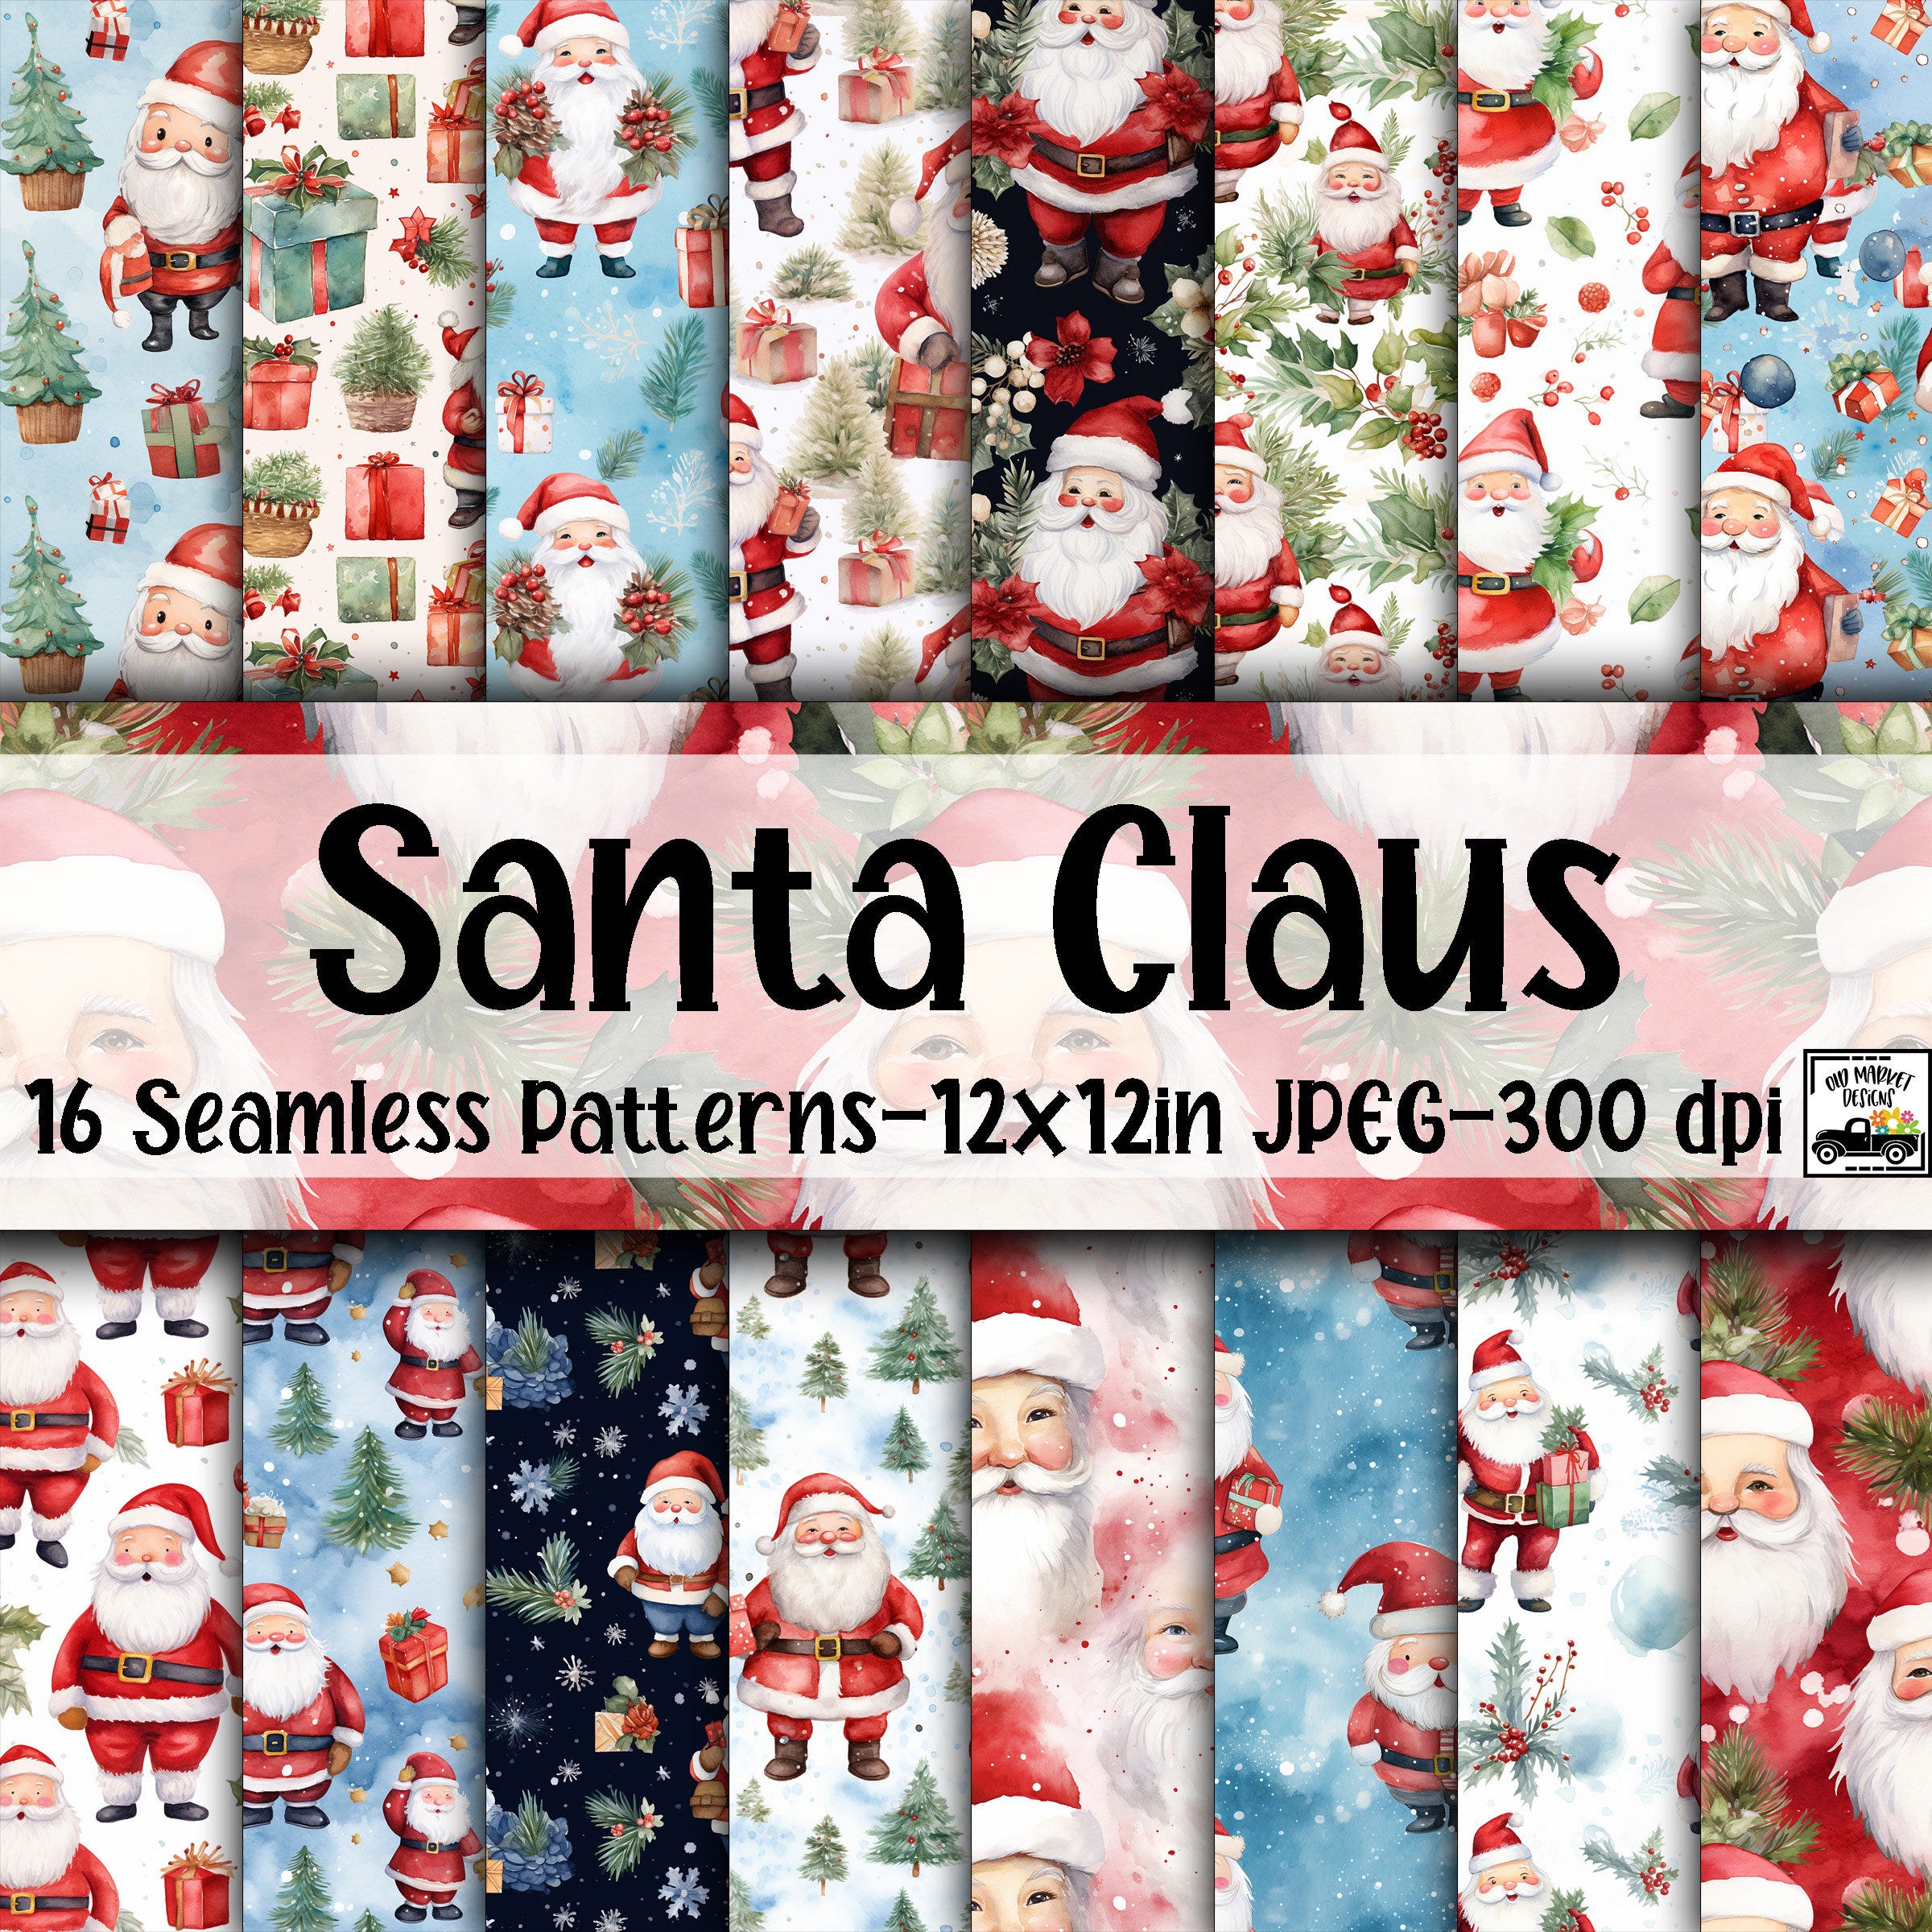 Watercolor Santa Claus SEAMLESS Patterns - Christmas Digital Paper - 16 Designs - 12x12in - Commercial Use - Christmas Santa Claus